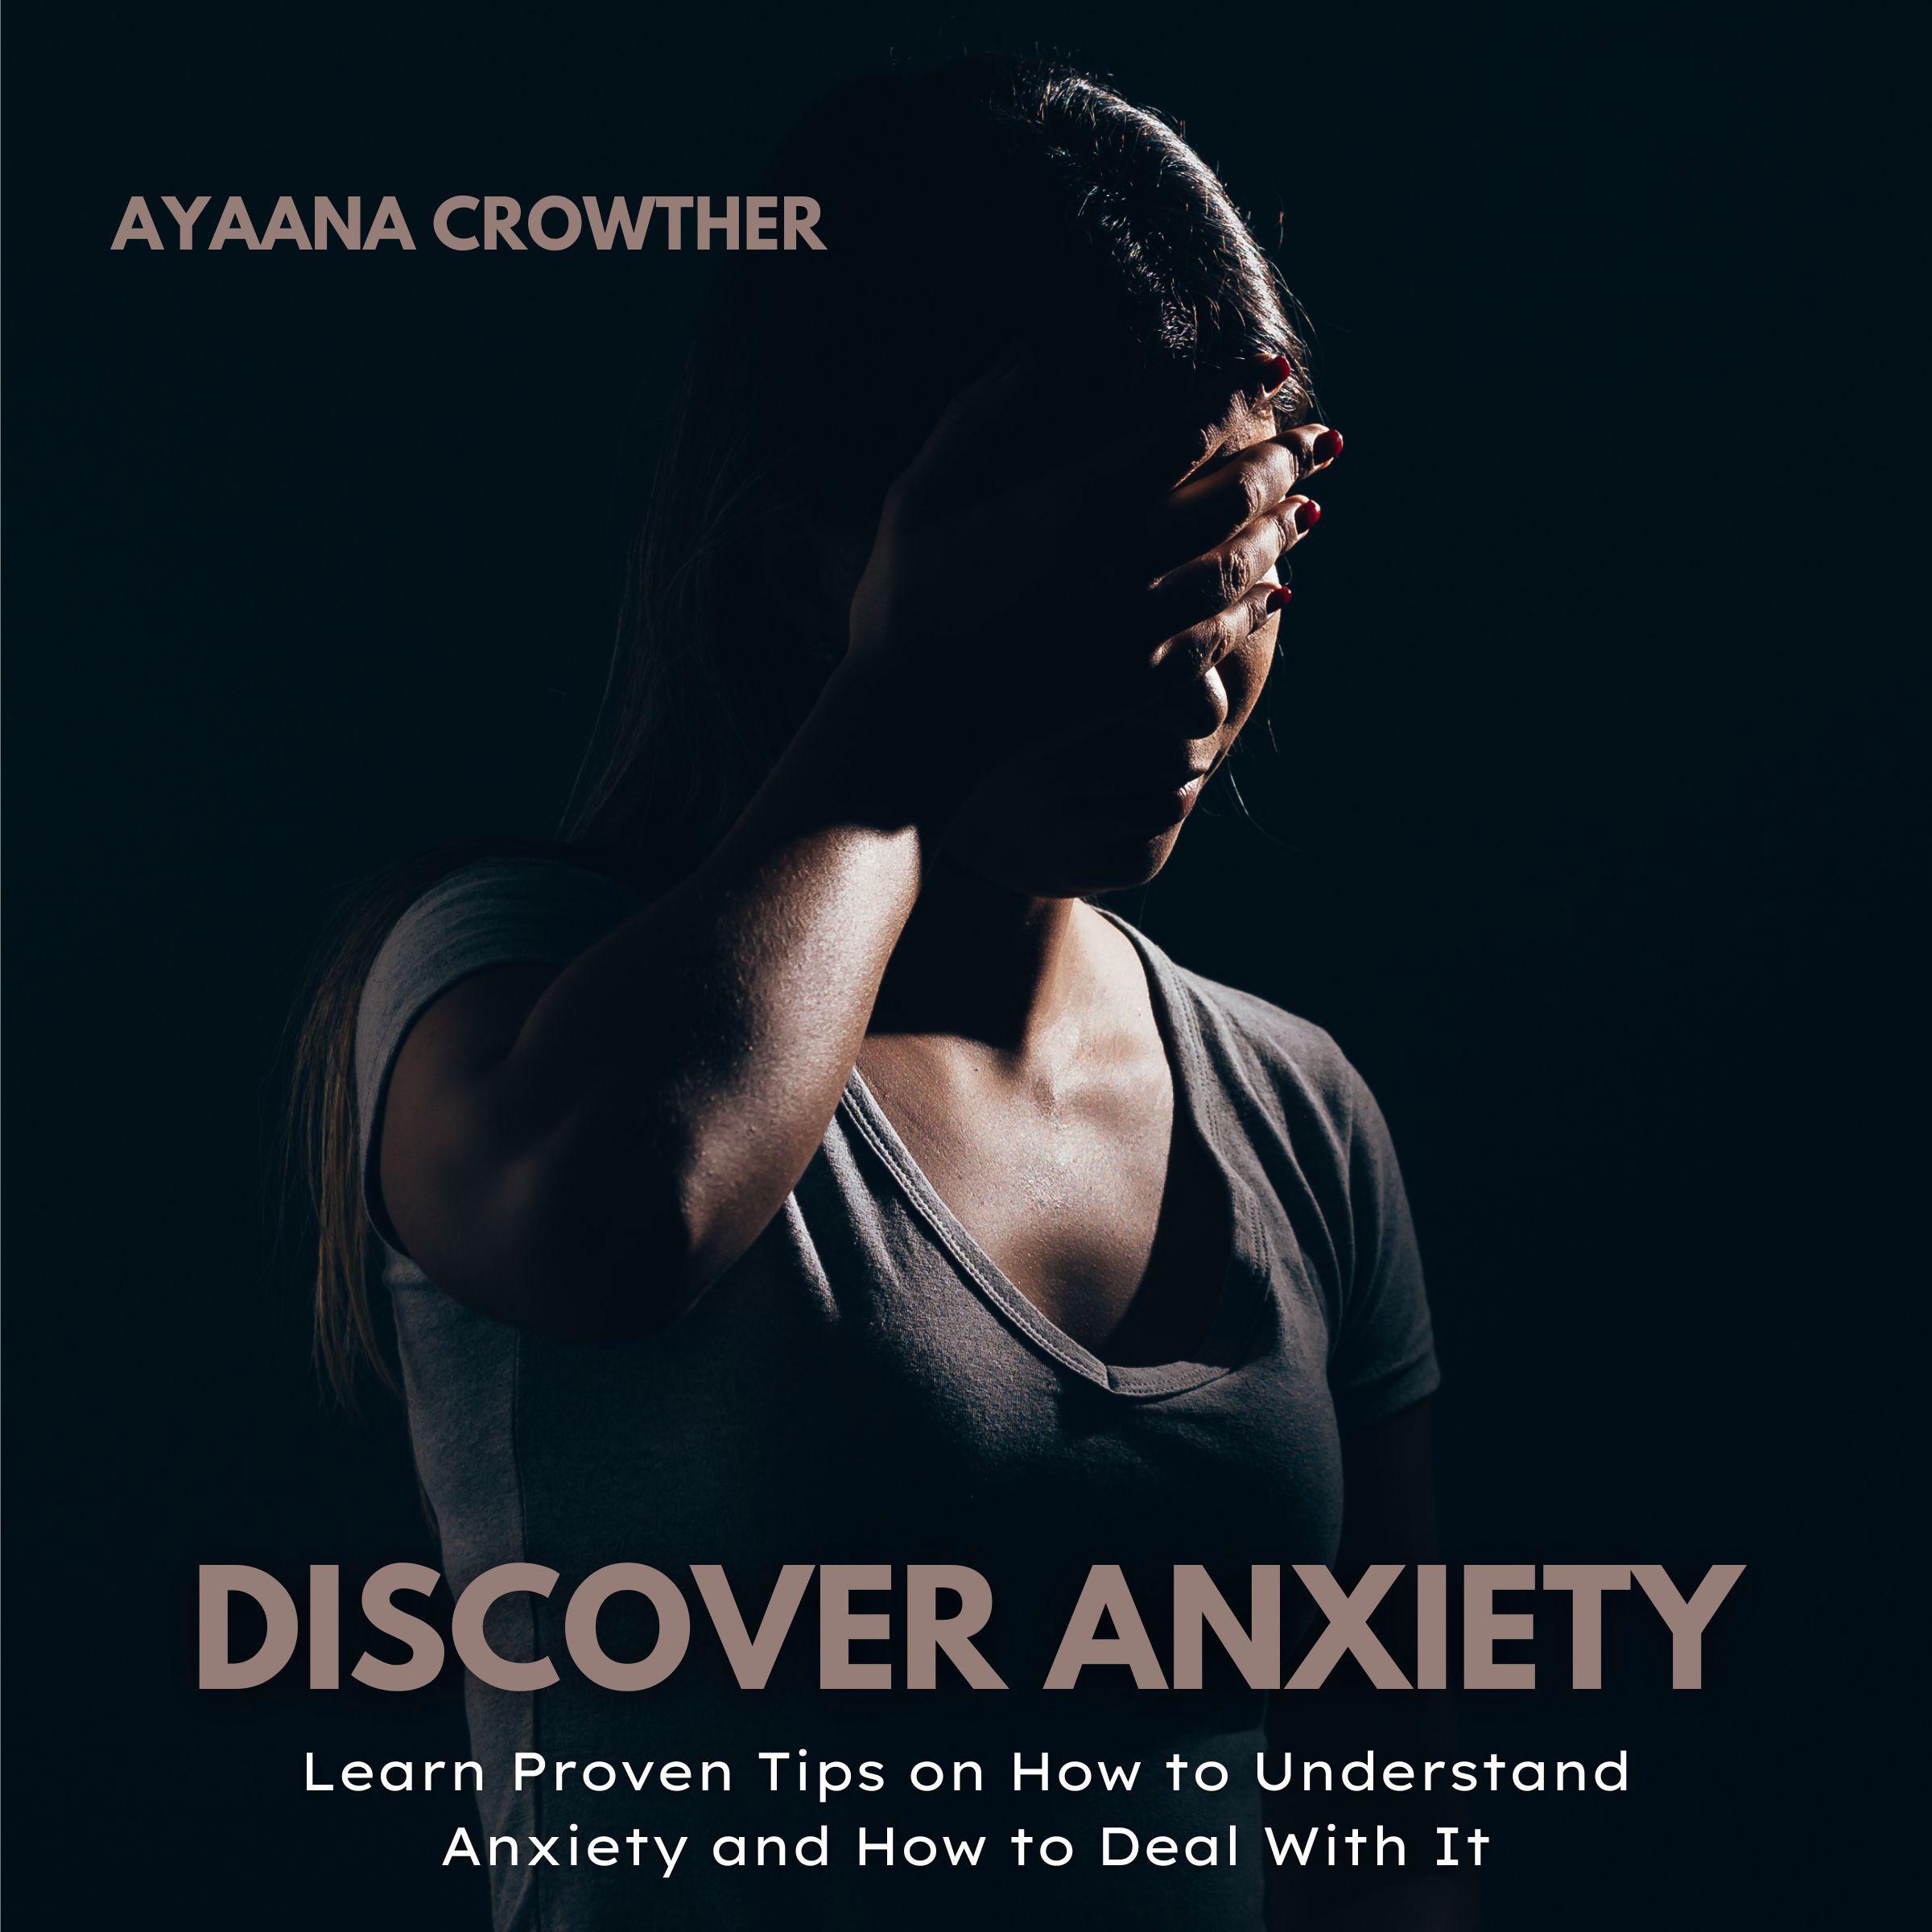 Discover Anxiety